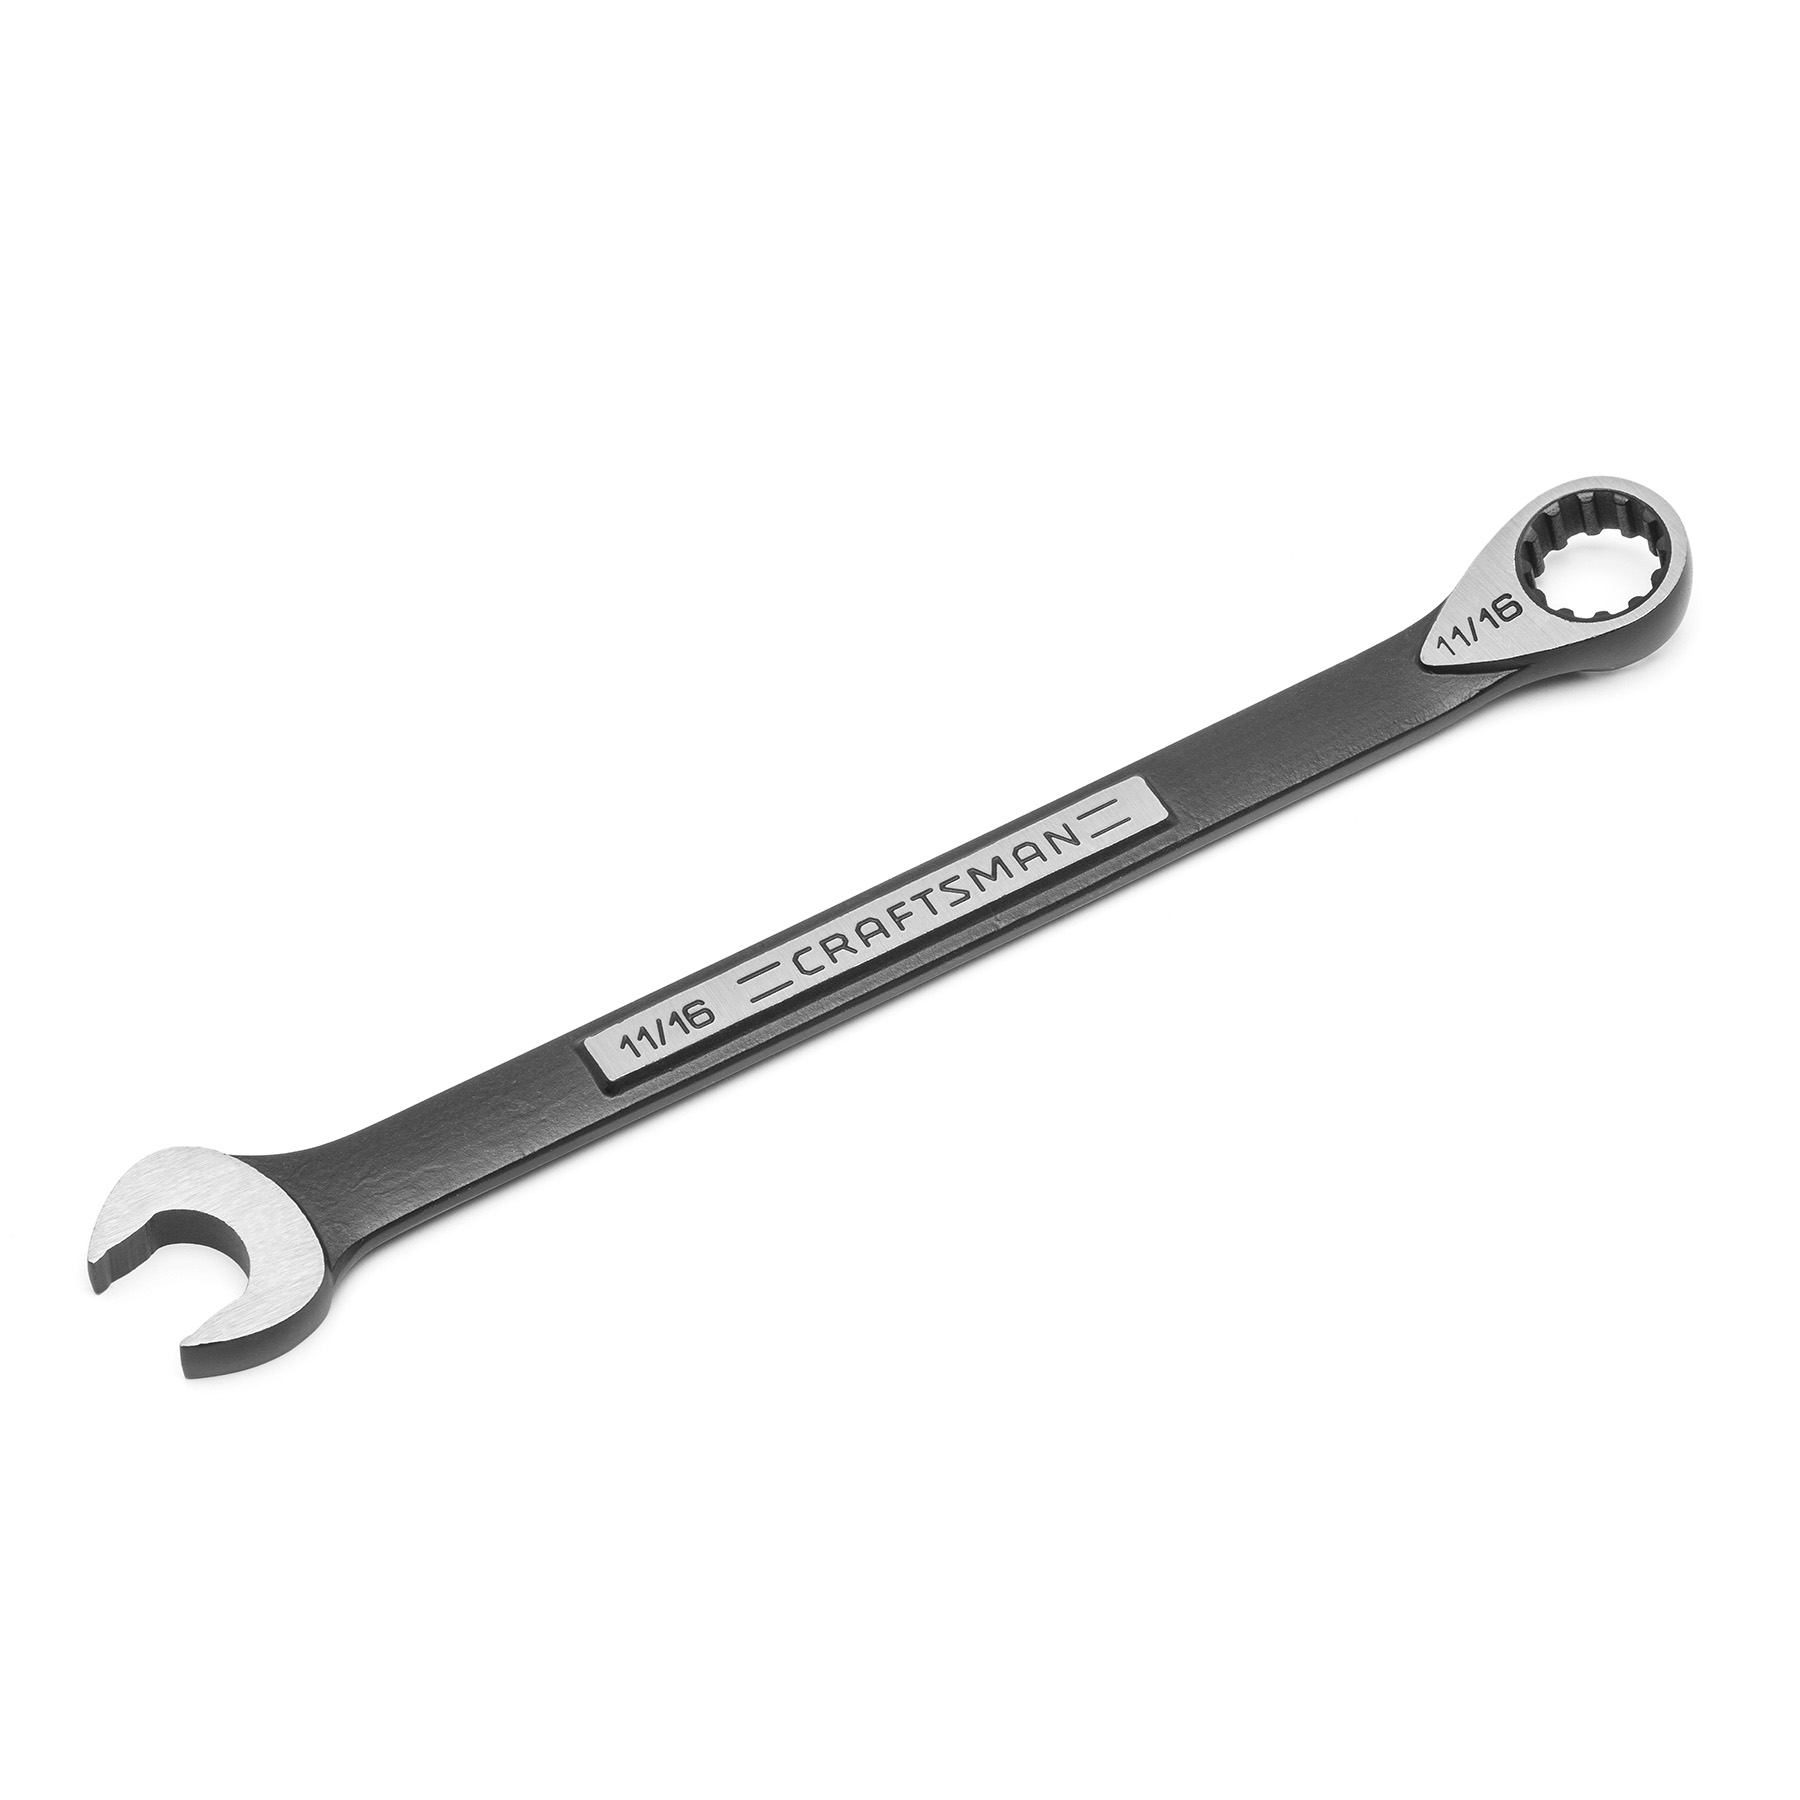 0099575394355 - 11/16IN UNIVERSAL MAX AXESS COMBINATION WRENCH